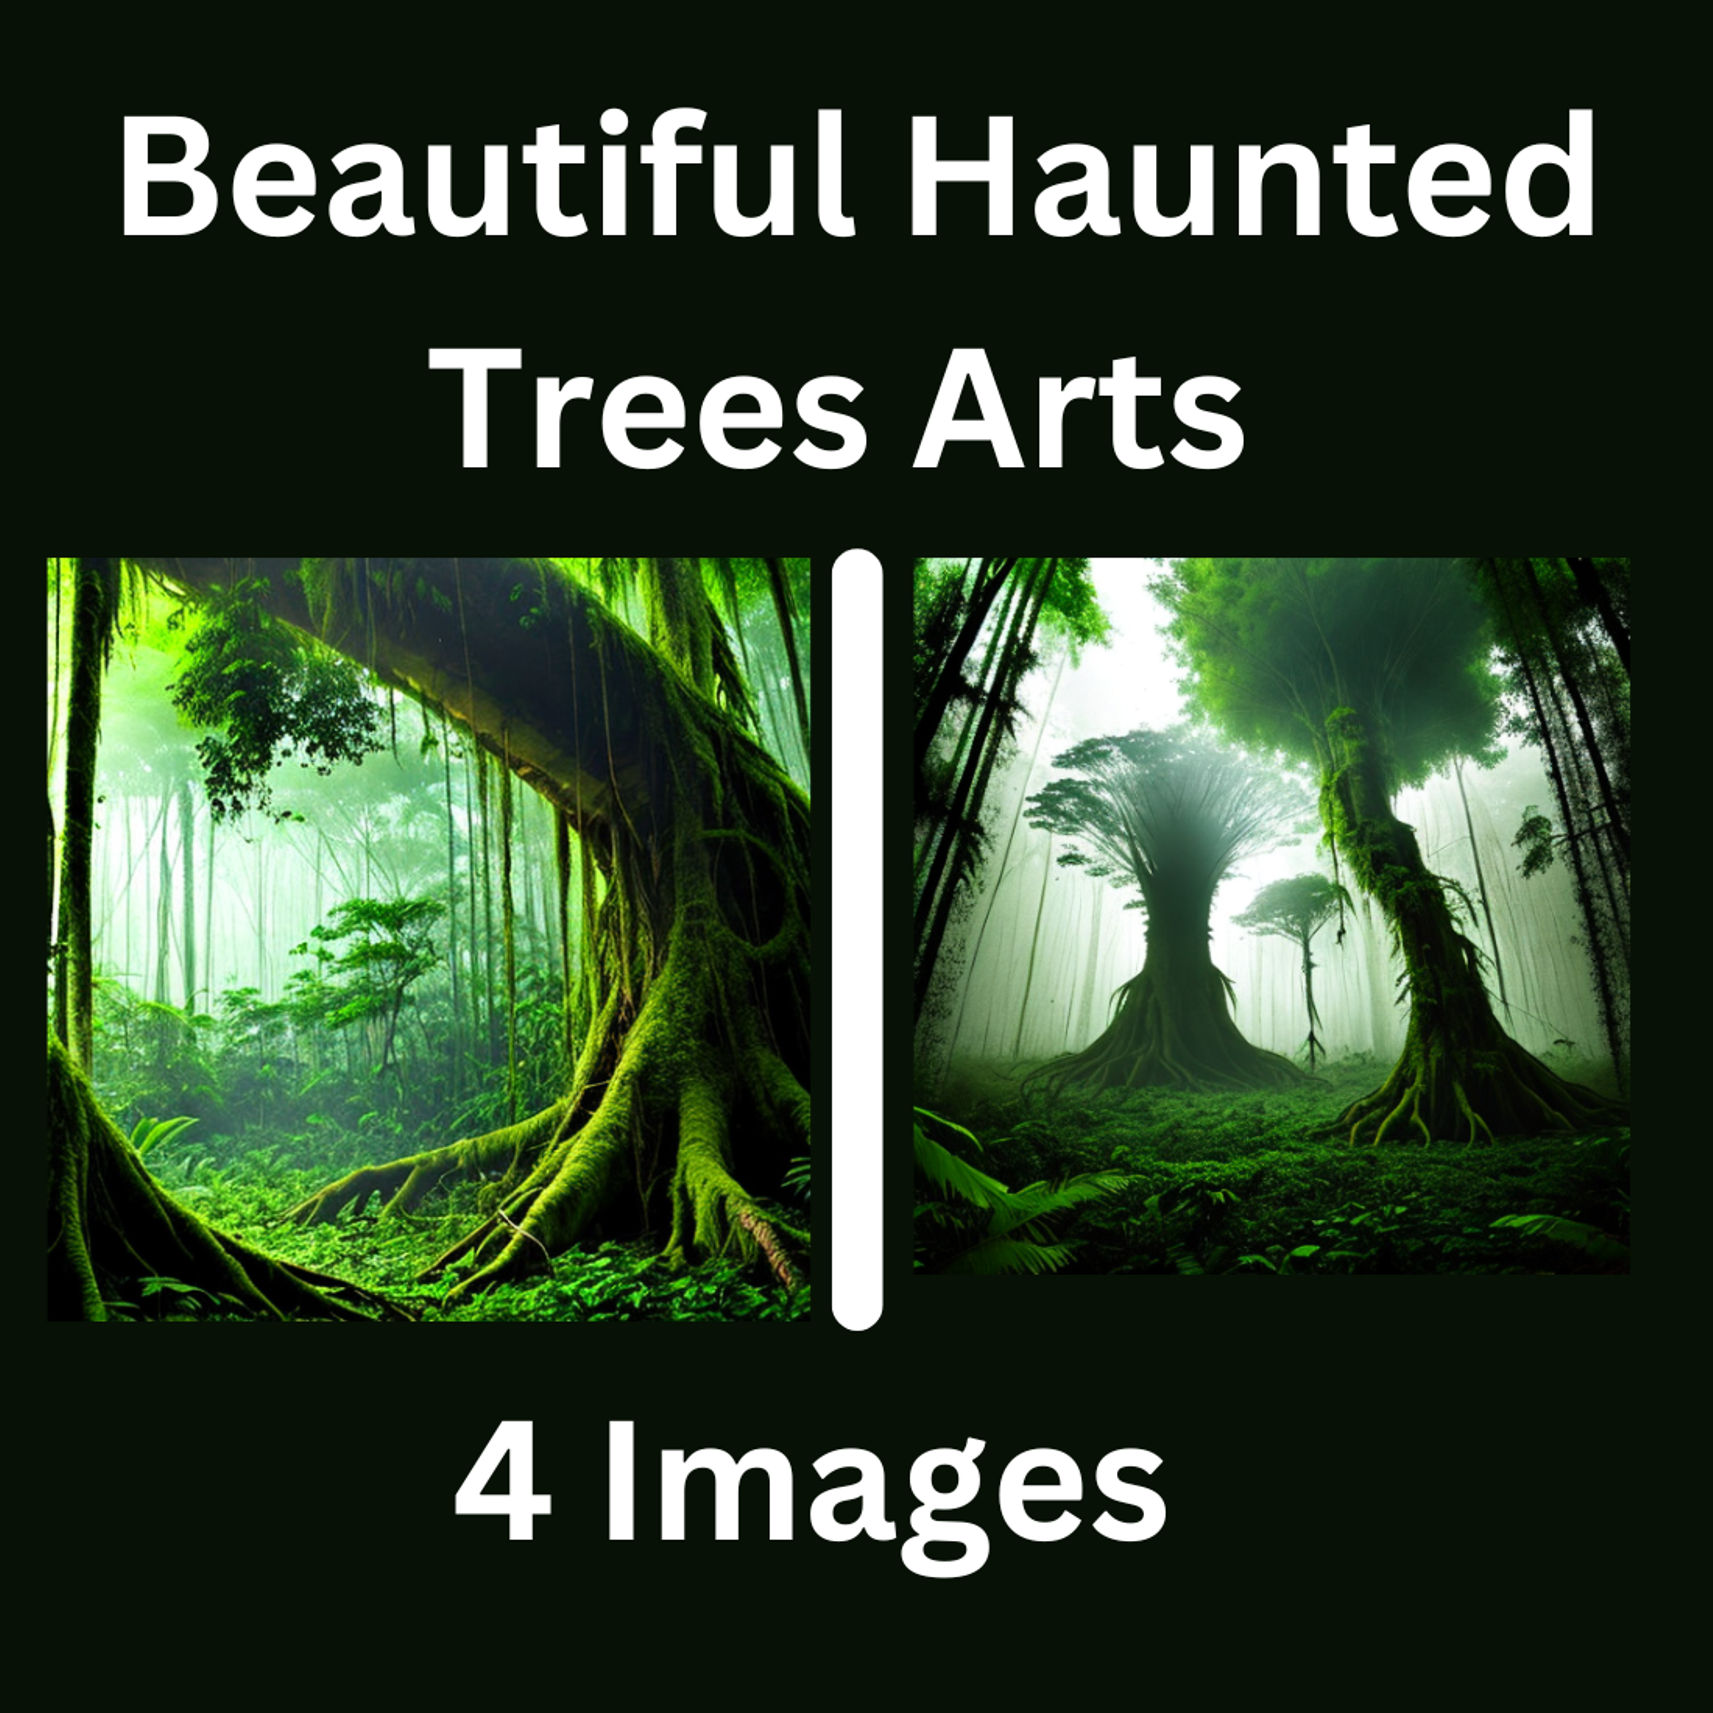 4 Beautiful Haunted Trees | Arts | Amazon Forest cover image.